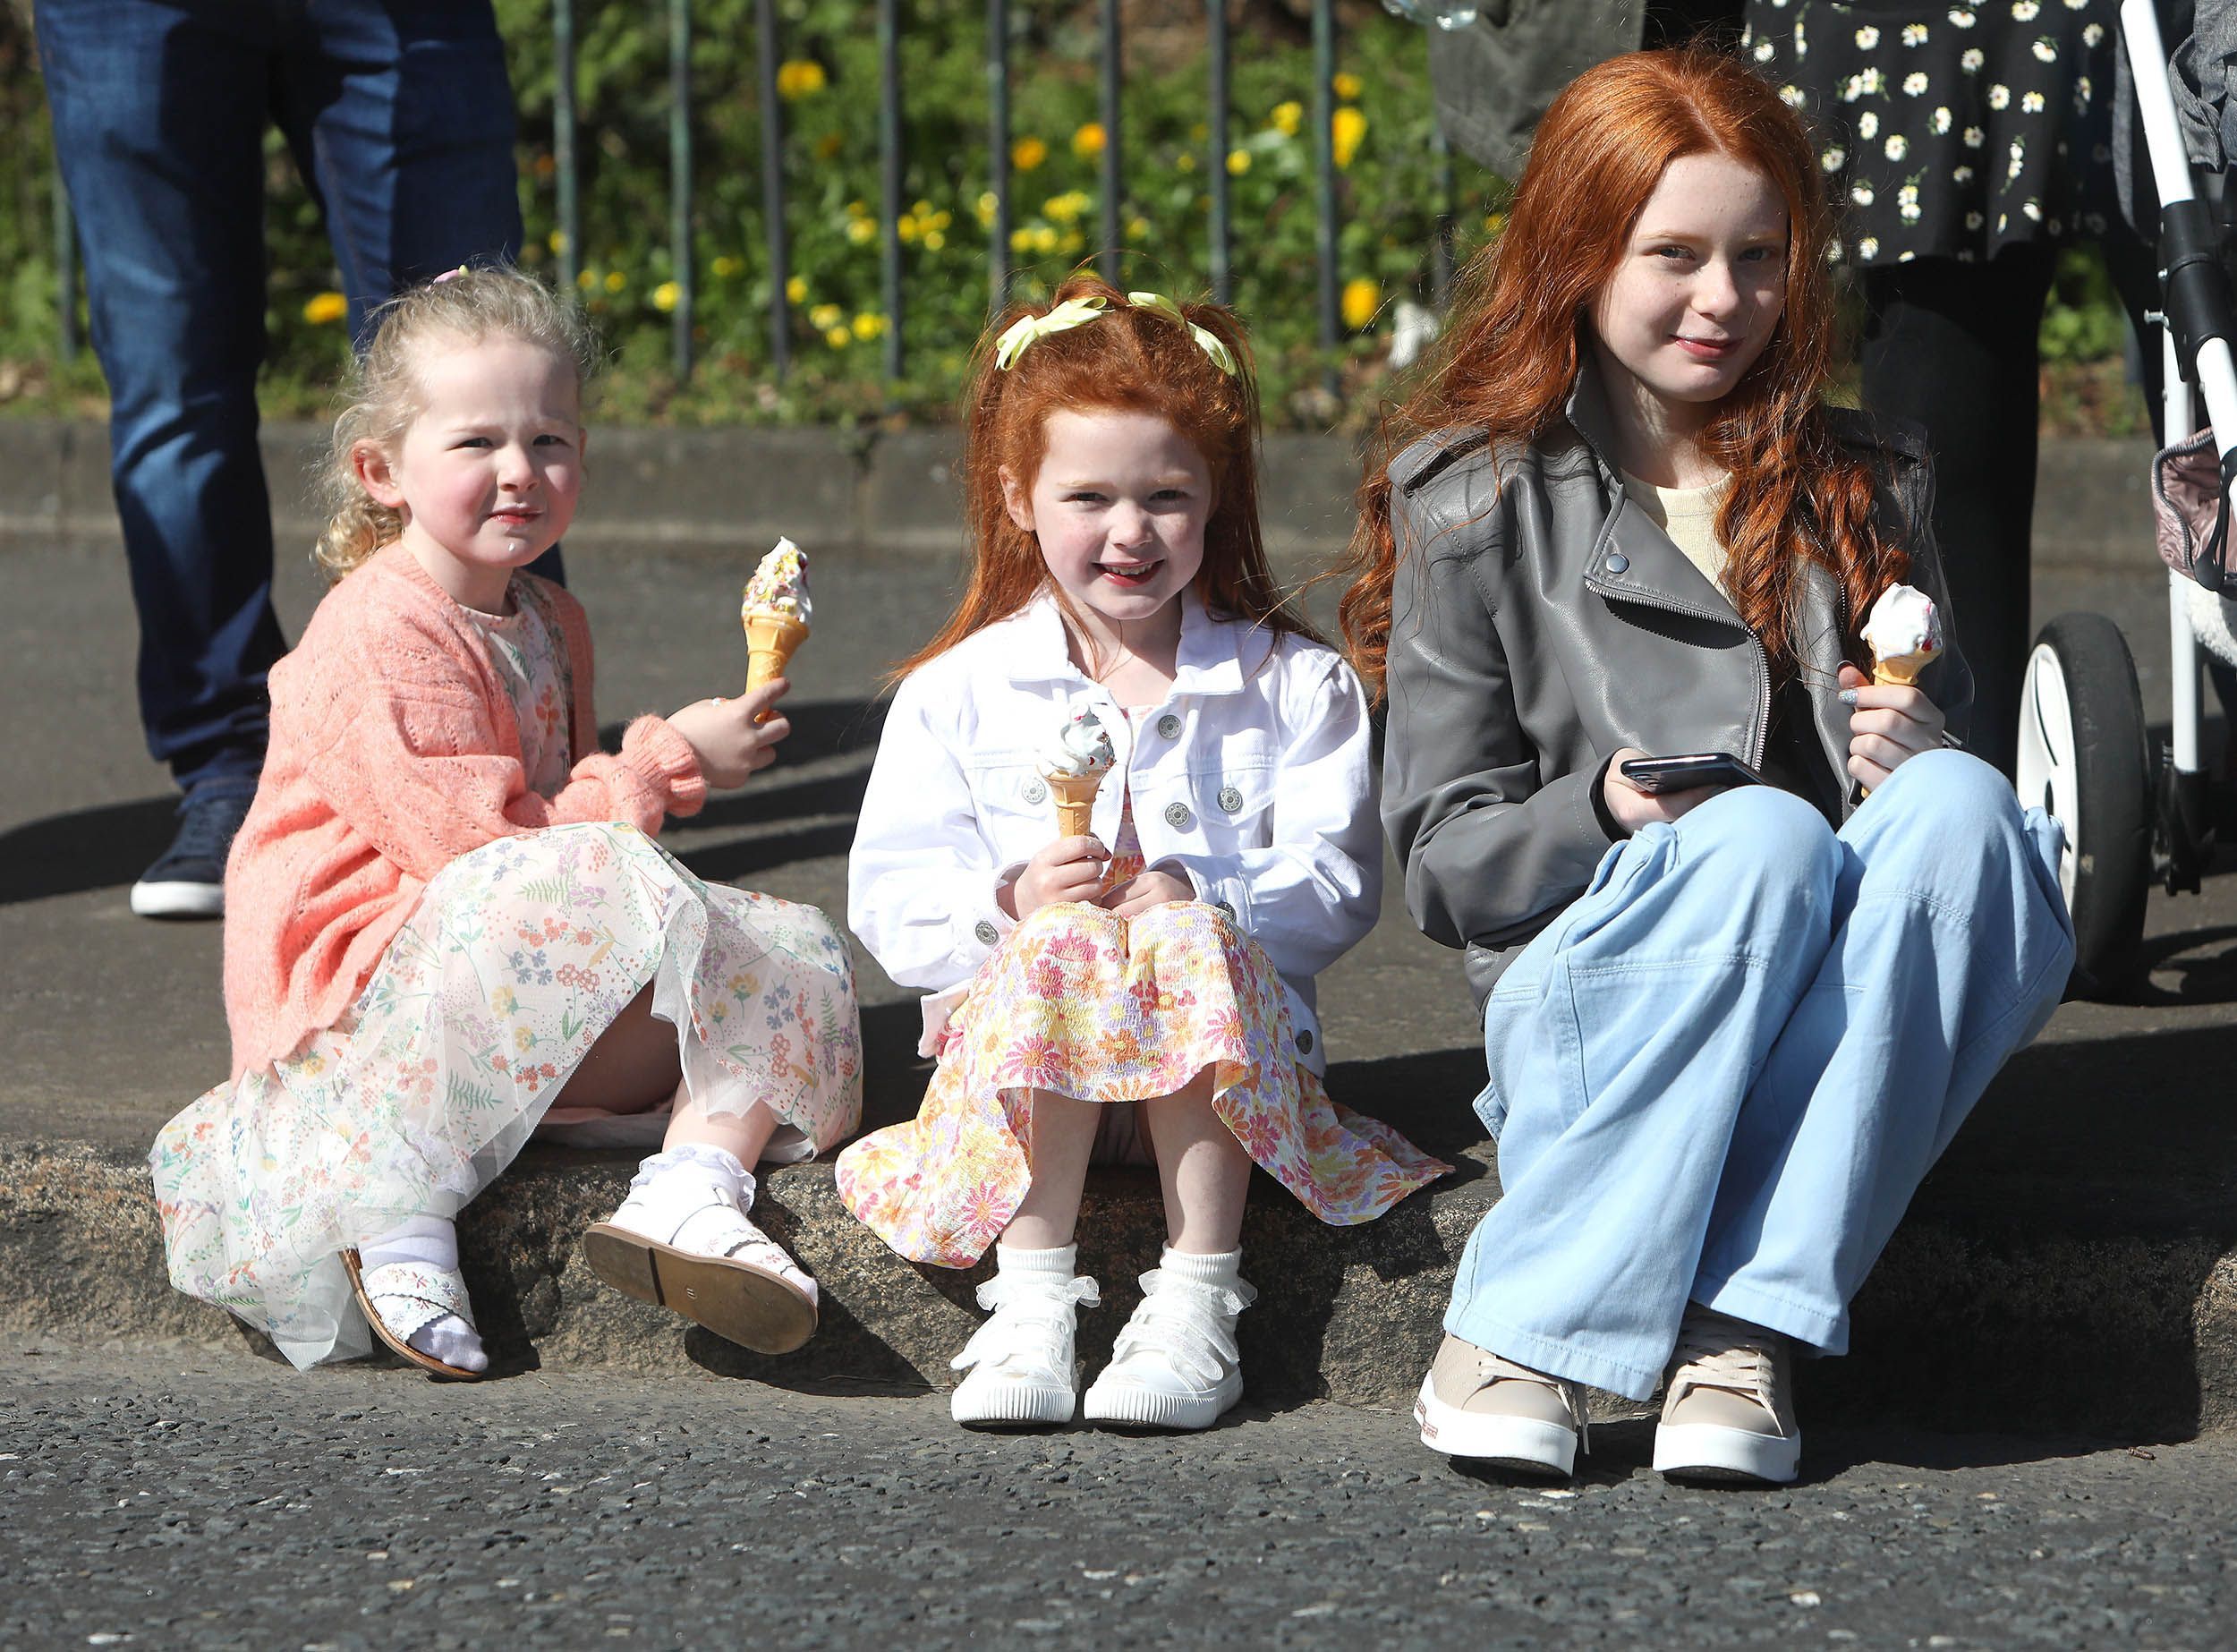 EGG-CELLENT CELEBRATION: Watching the Easter Parade on the Falls Road on Sunday